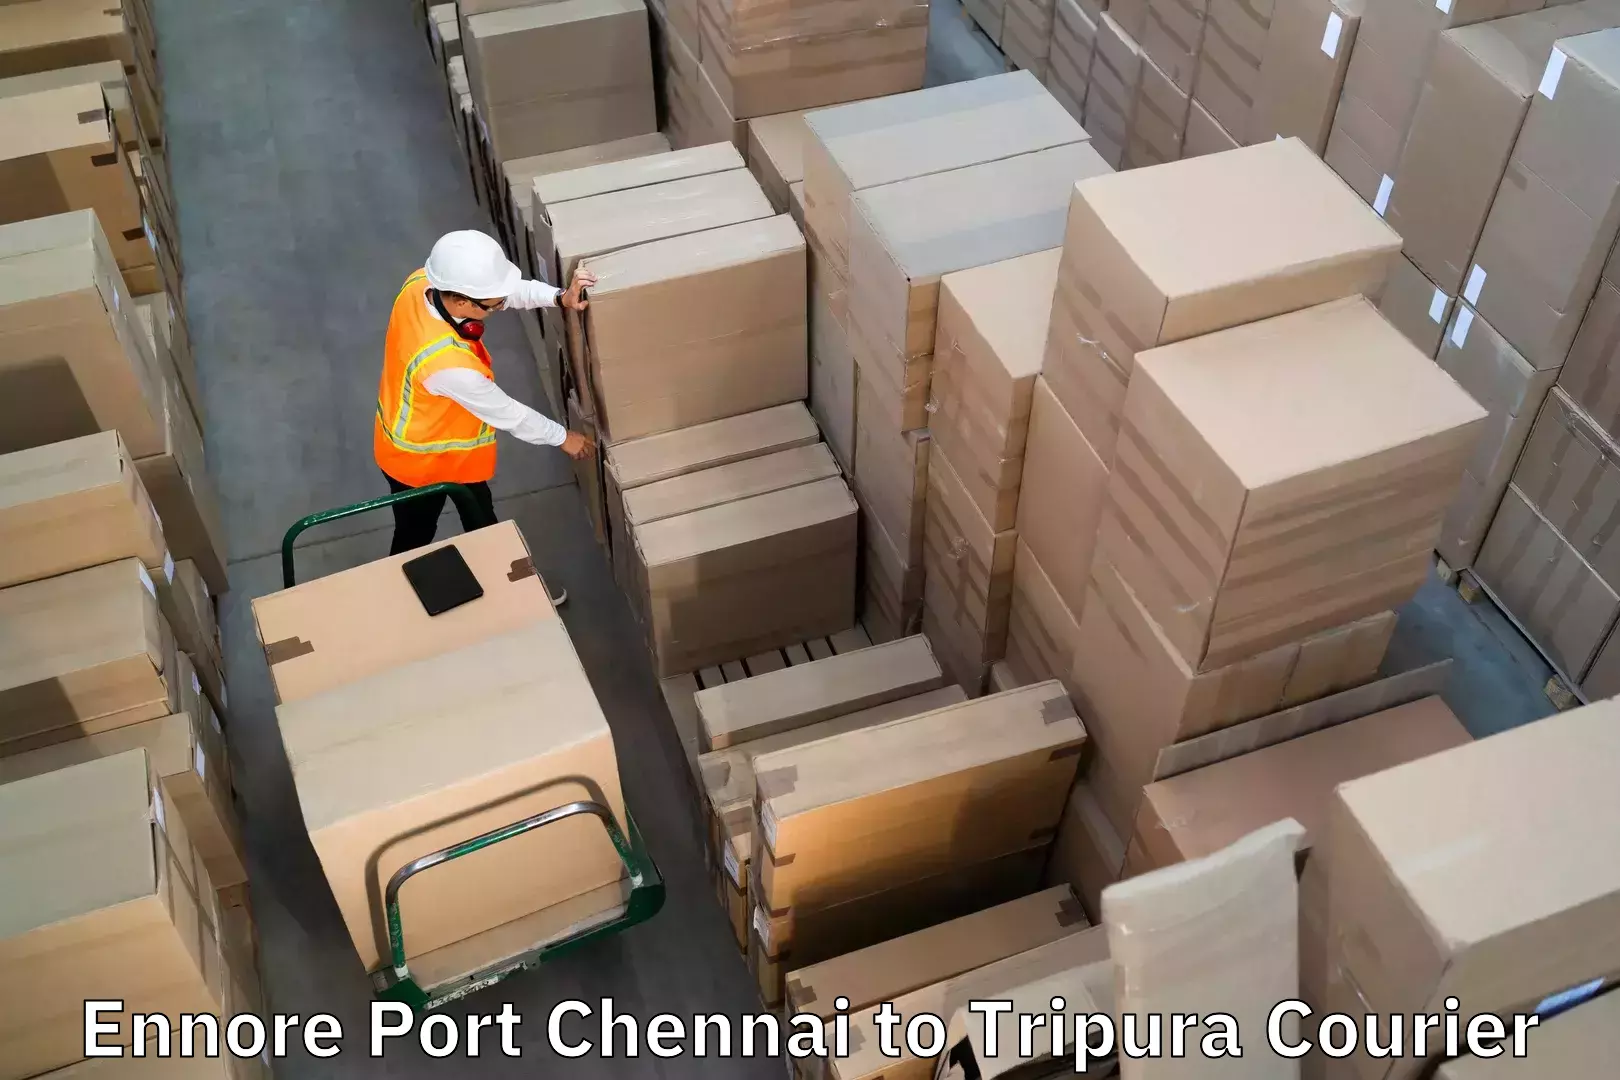 Automated luggage transport in Ennore Port Chennai to Tripura